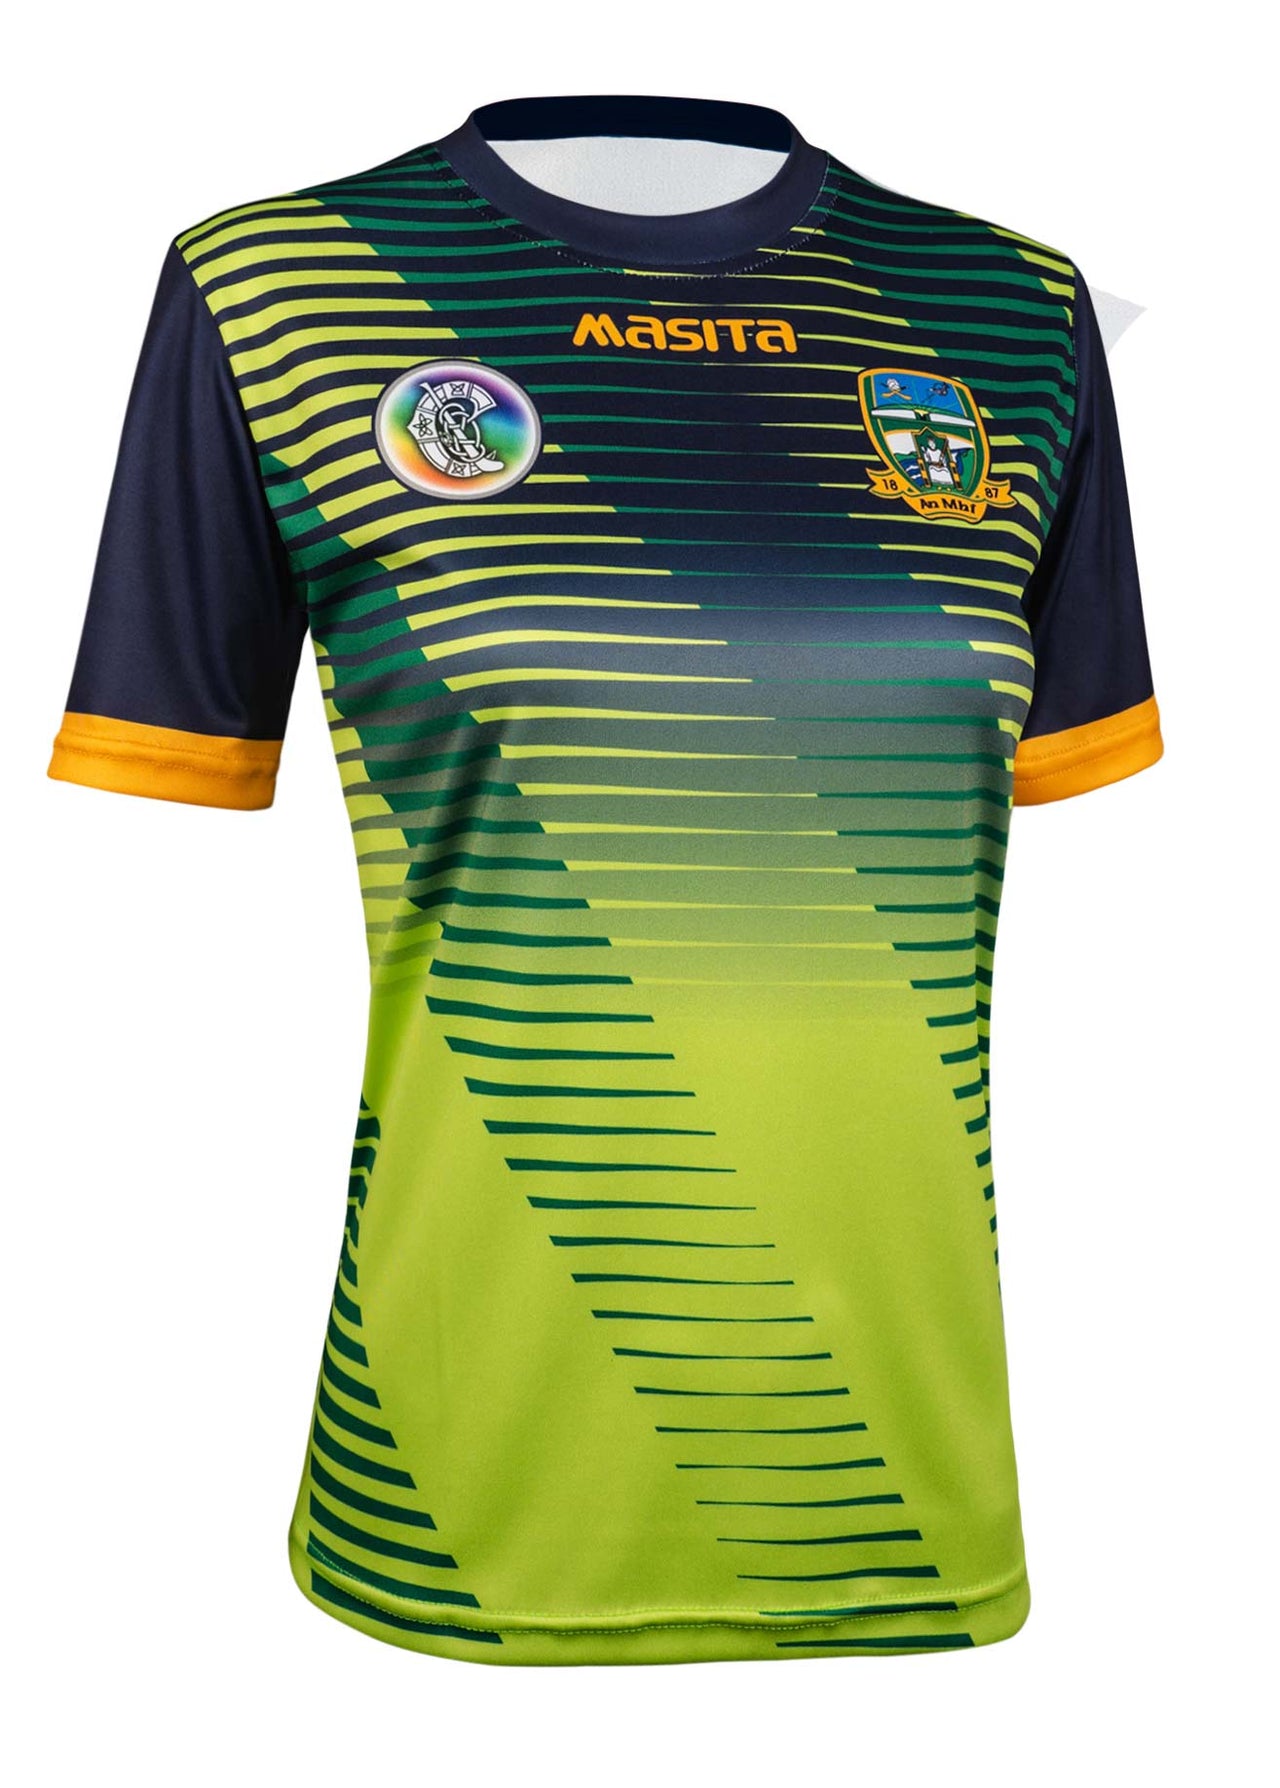 Meath Camogie Training Jersey Regular Fit Adult